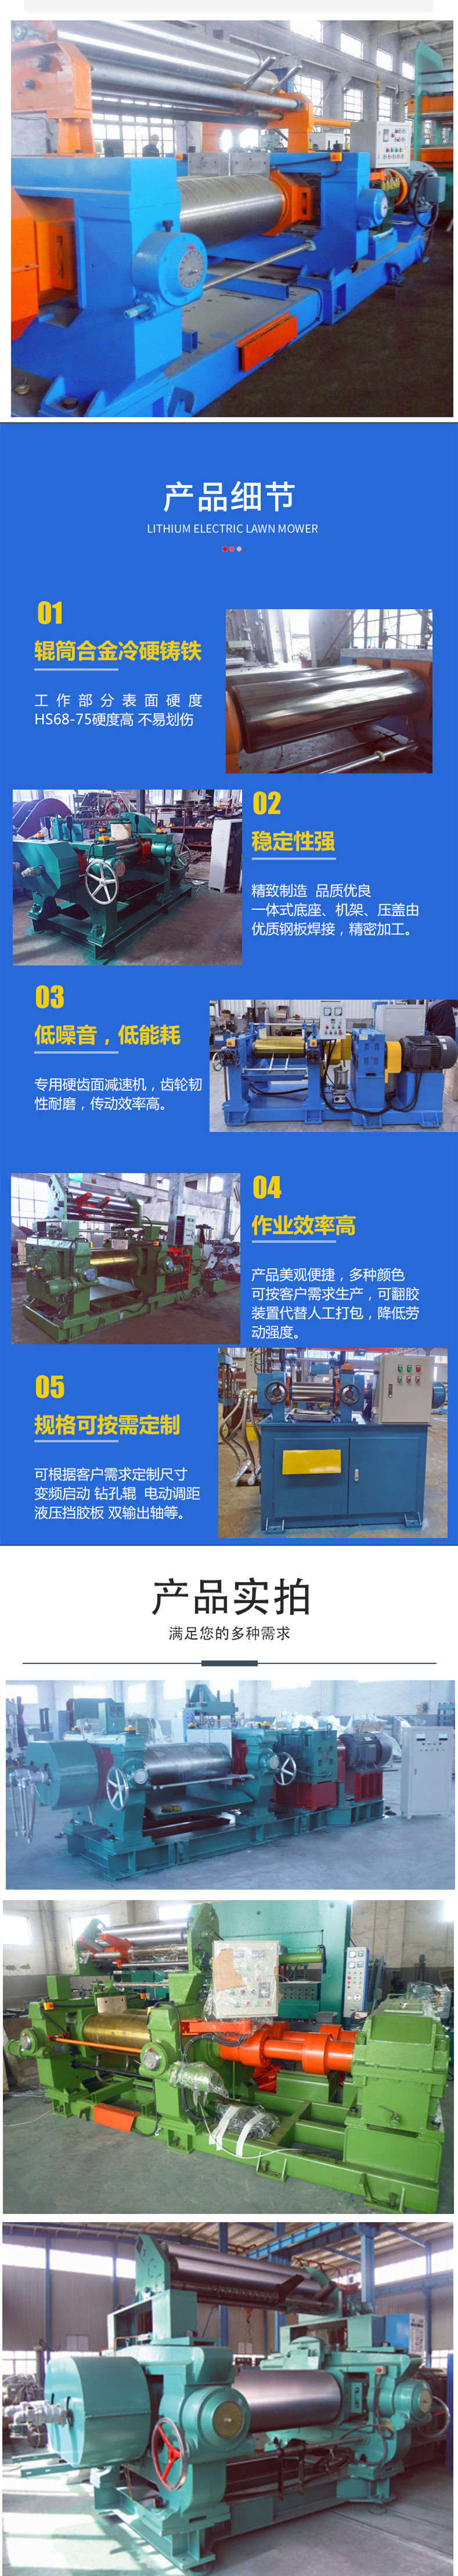 Jiaxin Run 14 inch Bearing Thin Oil Lubrication Rubber Refining Machine-360 Hard Toothed Surface Reducer - Support Customization